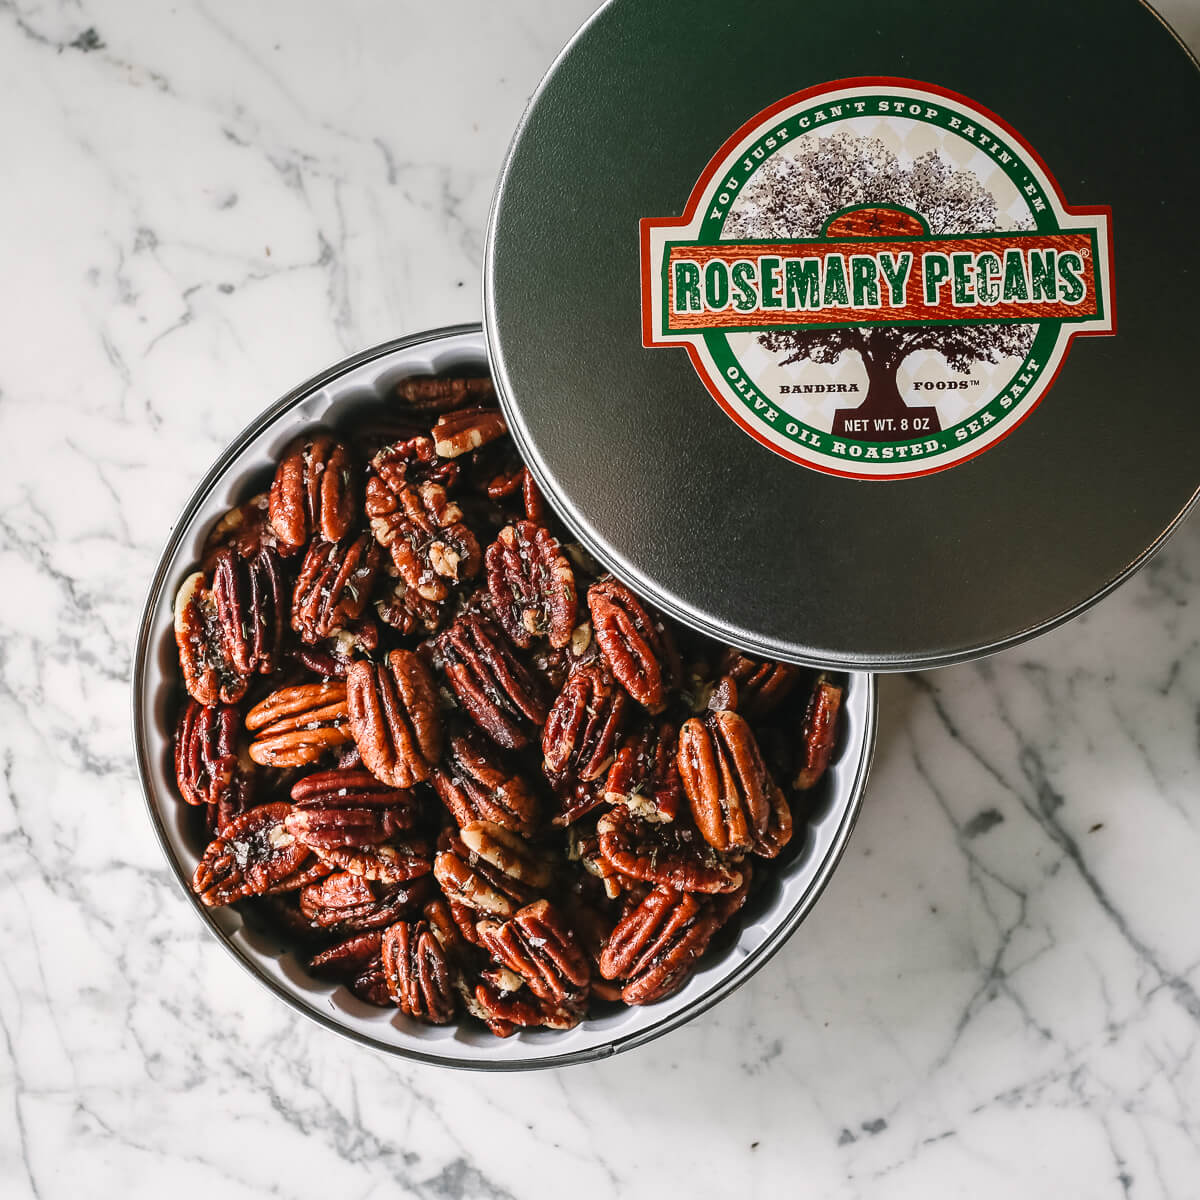 roasted pecans, extra virgin olive oil, rosemary, sea salt, 8oz tin, gift, corporate gift, gourmet gift